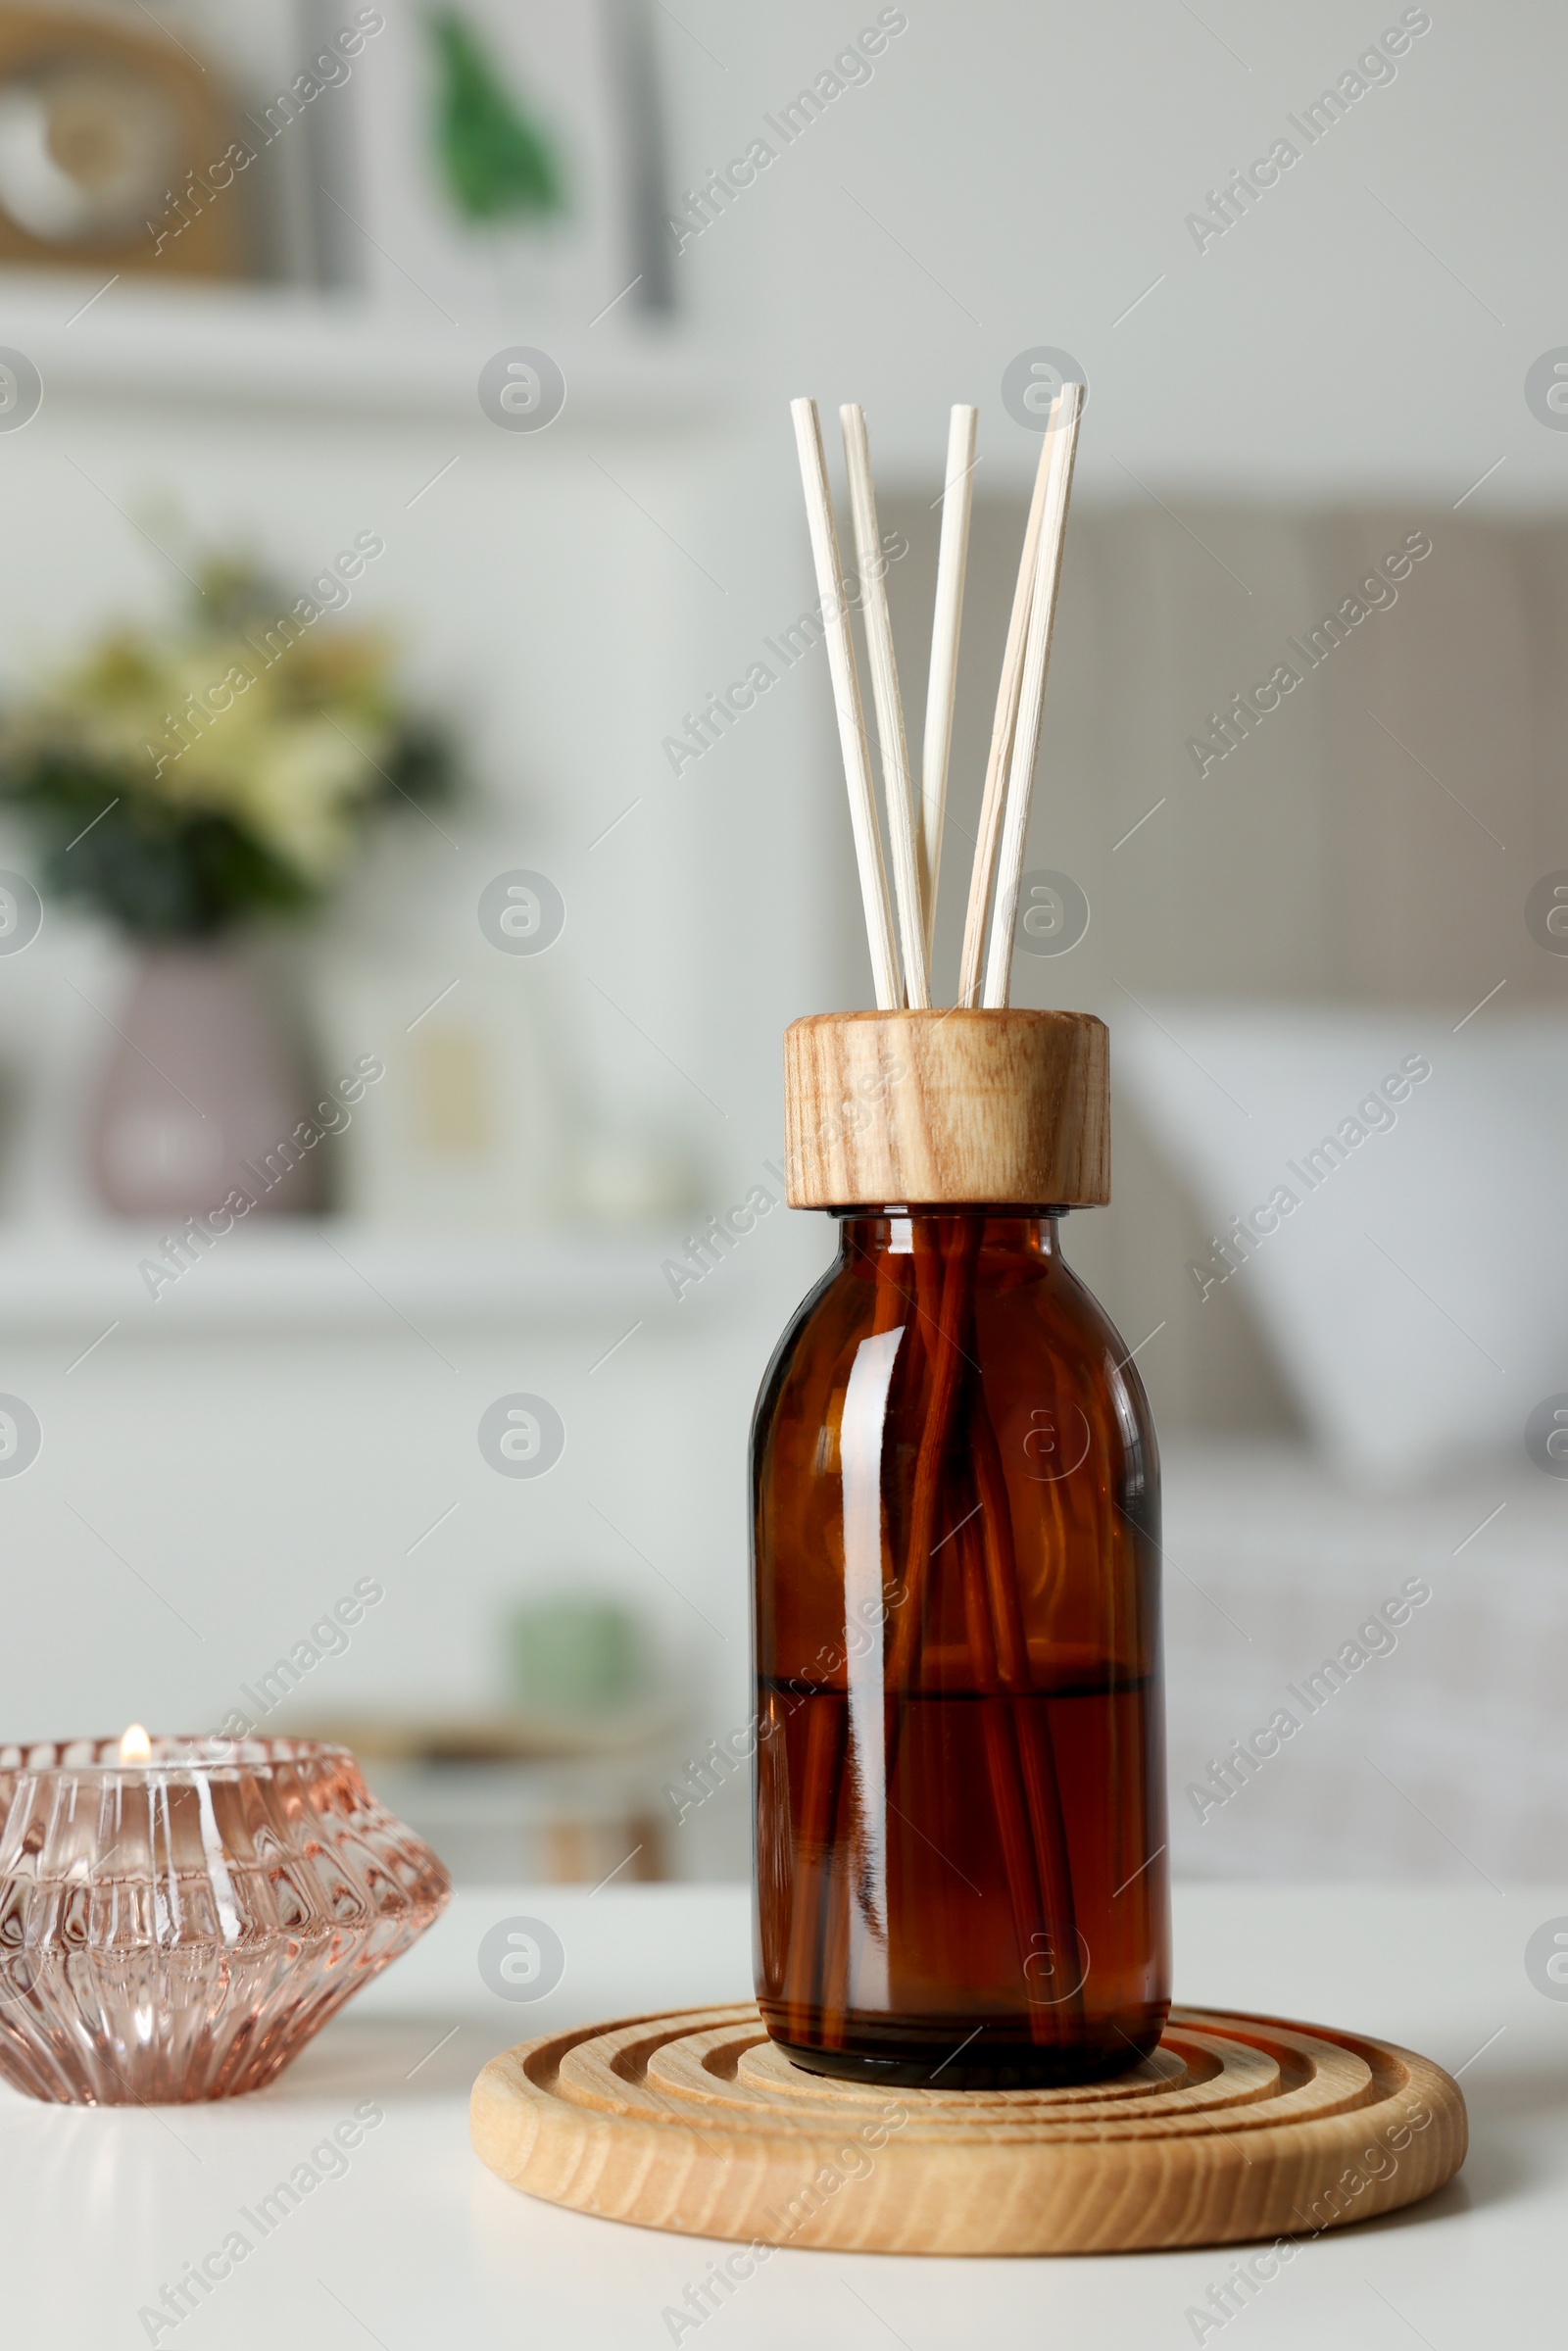 Photo of Aromatic reed air freshener and candle on white table in room